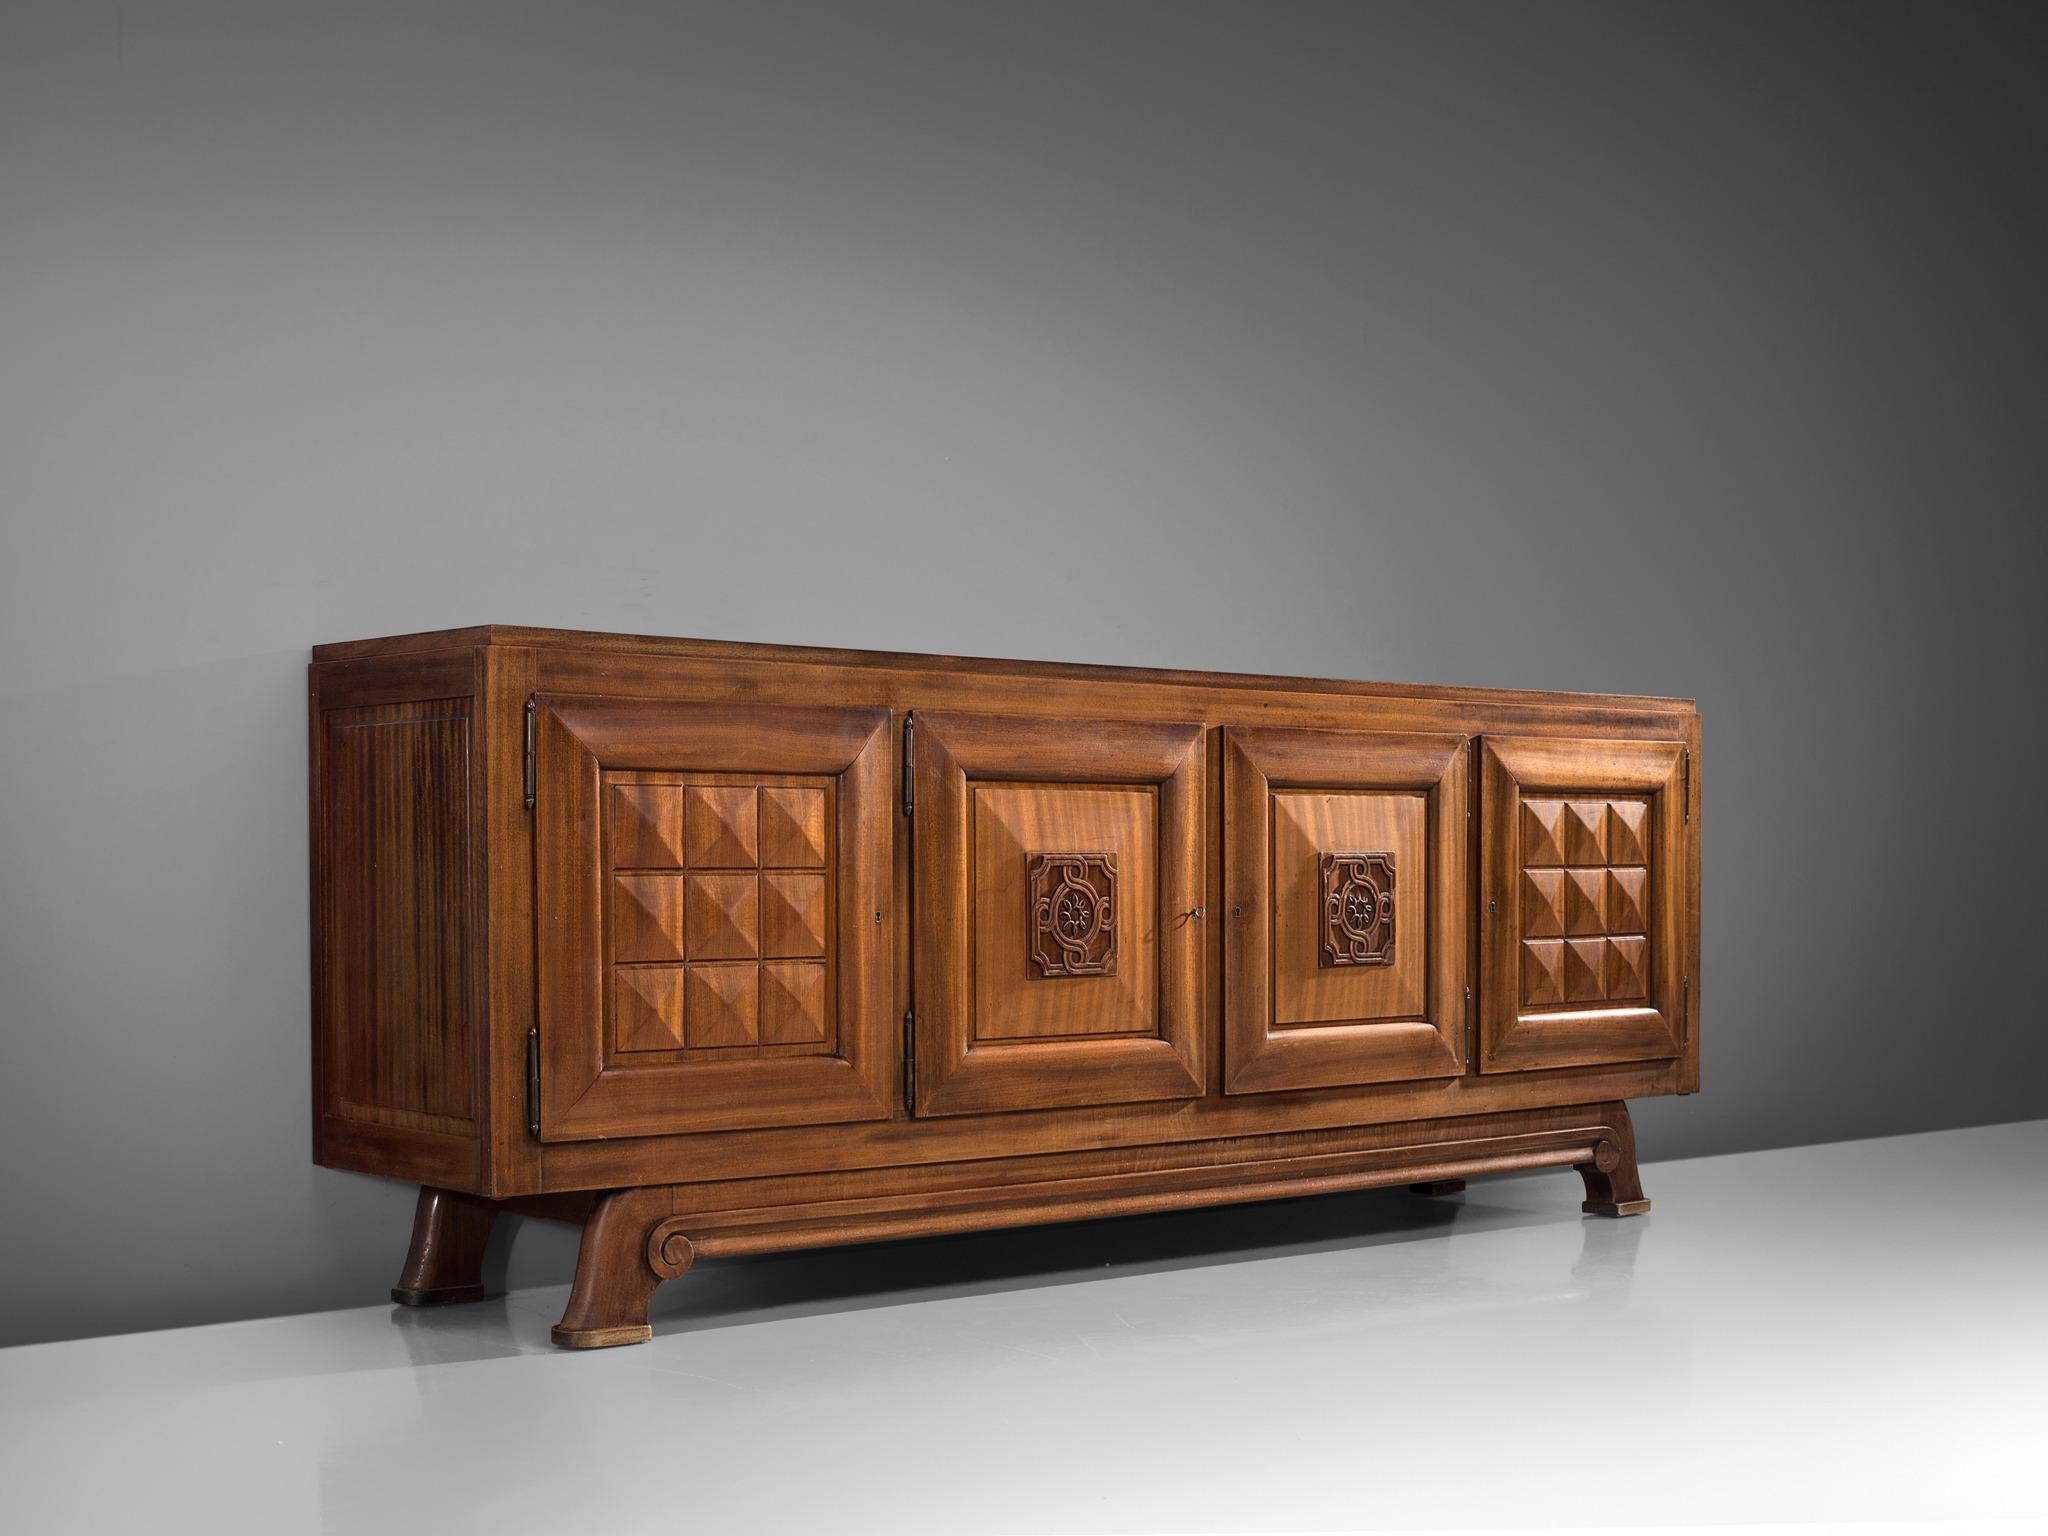 Gaston Poisson, credenza in mahogany, France, 1930s.

Sturdy credenza in with graphical door panels and parquet top. This four-door sideboard is equipped with several shelves and drawers which provide plenty of storage space. The shelves are